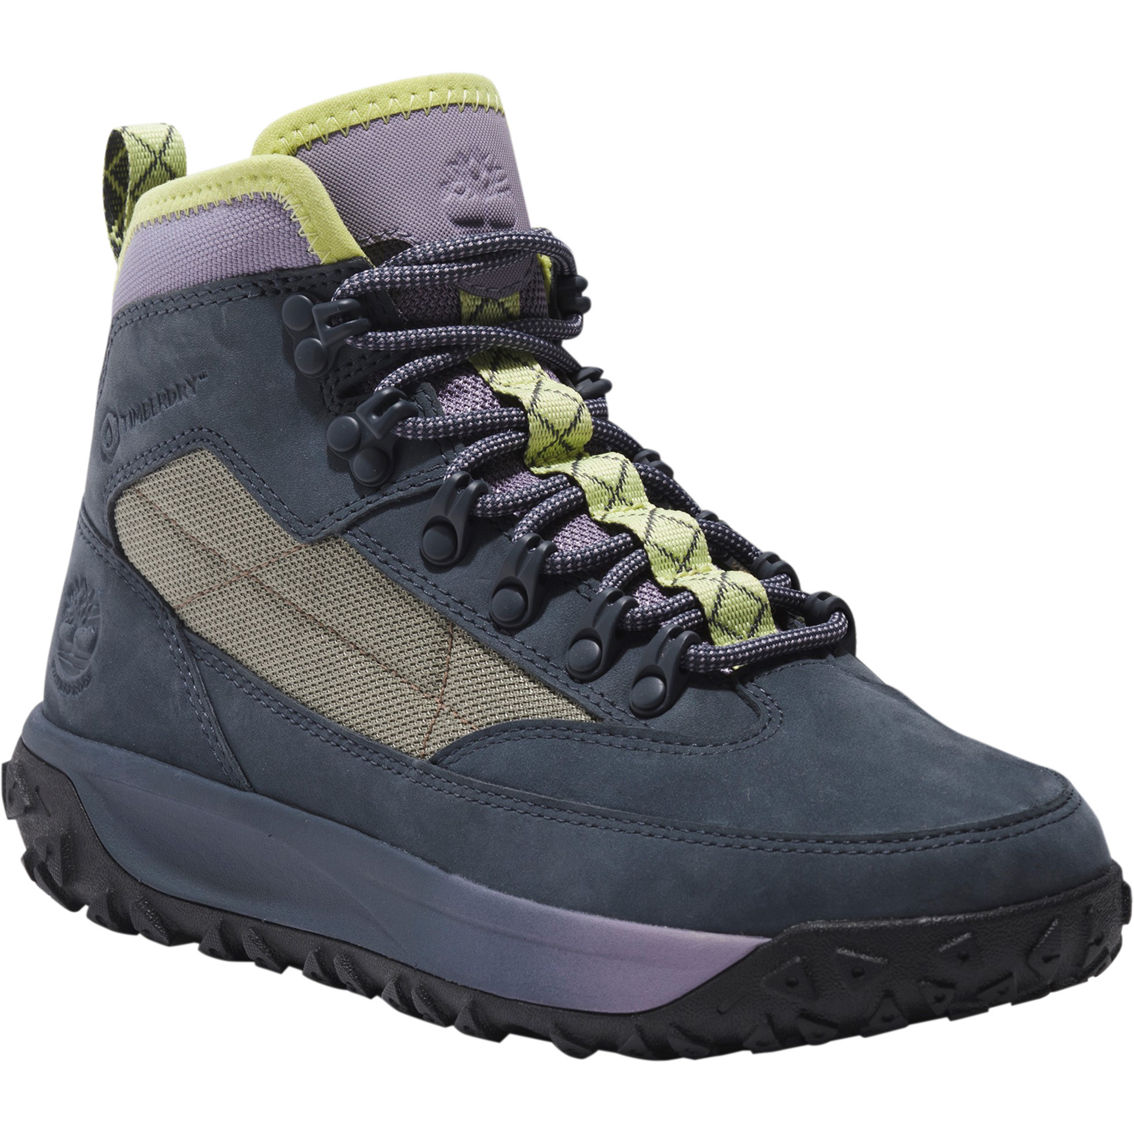 Timberland Women's GreenStride Motion 6 Waterproof Hiking Boots - Image 5 of 5